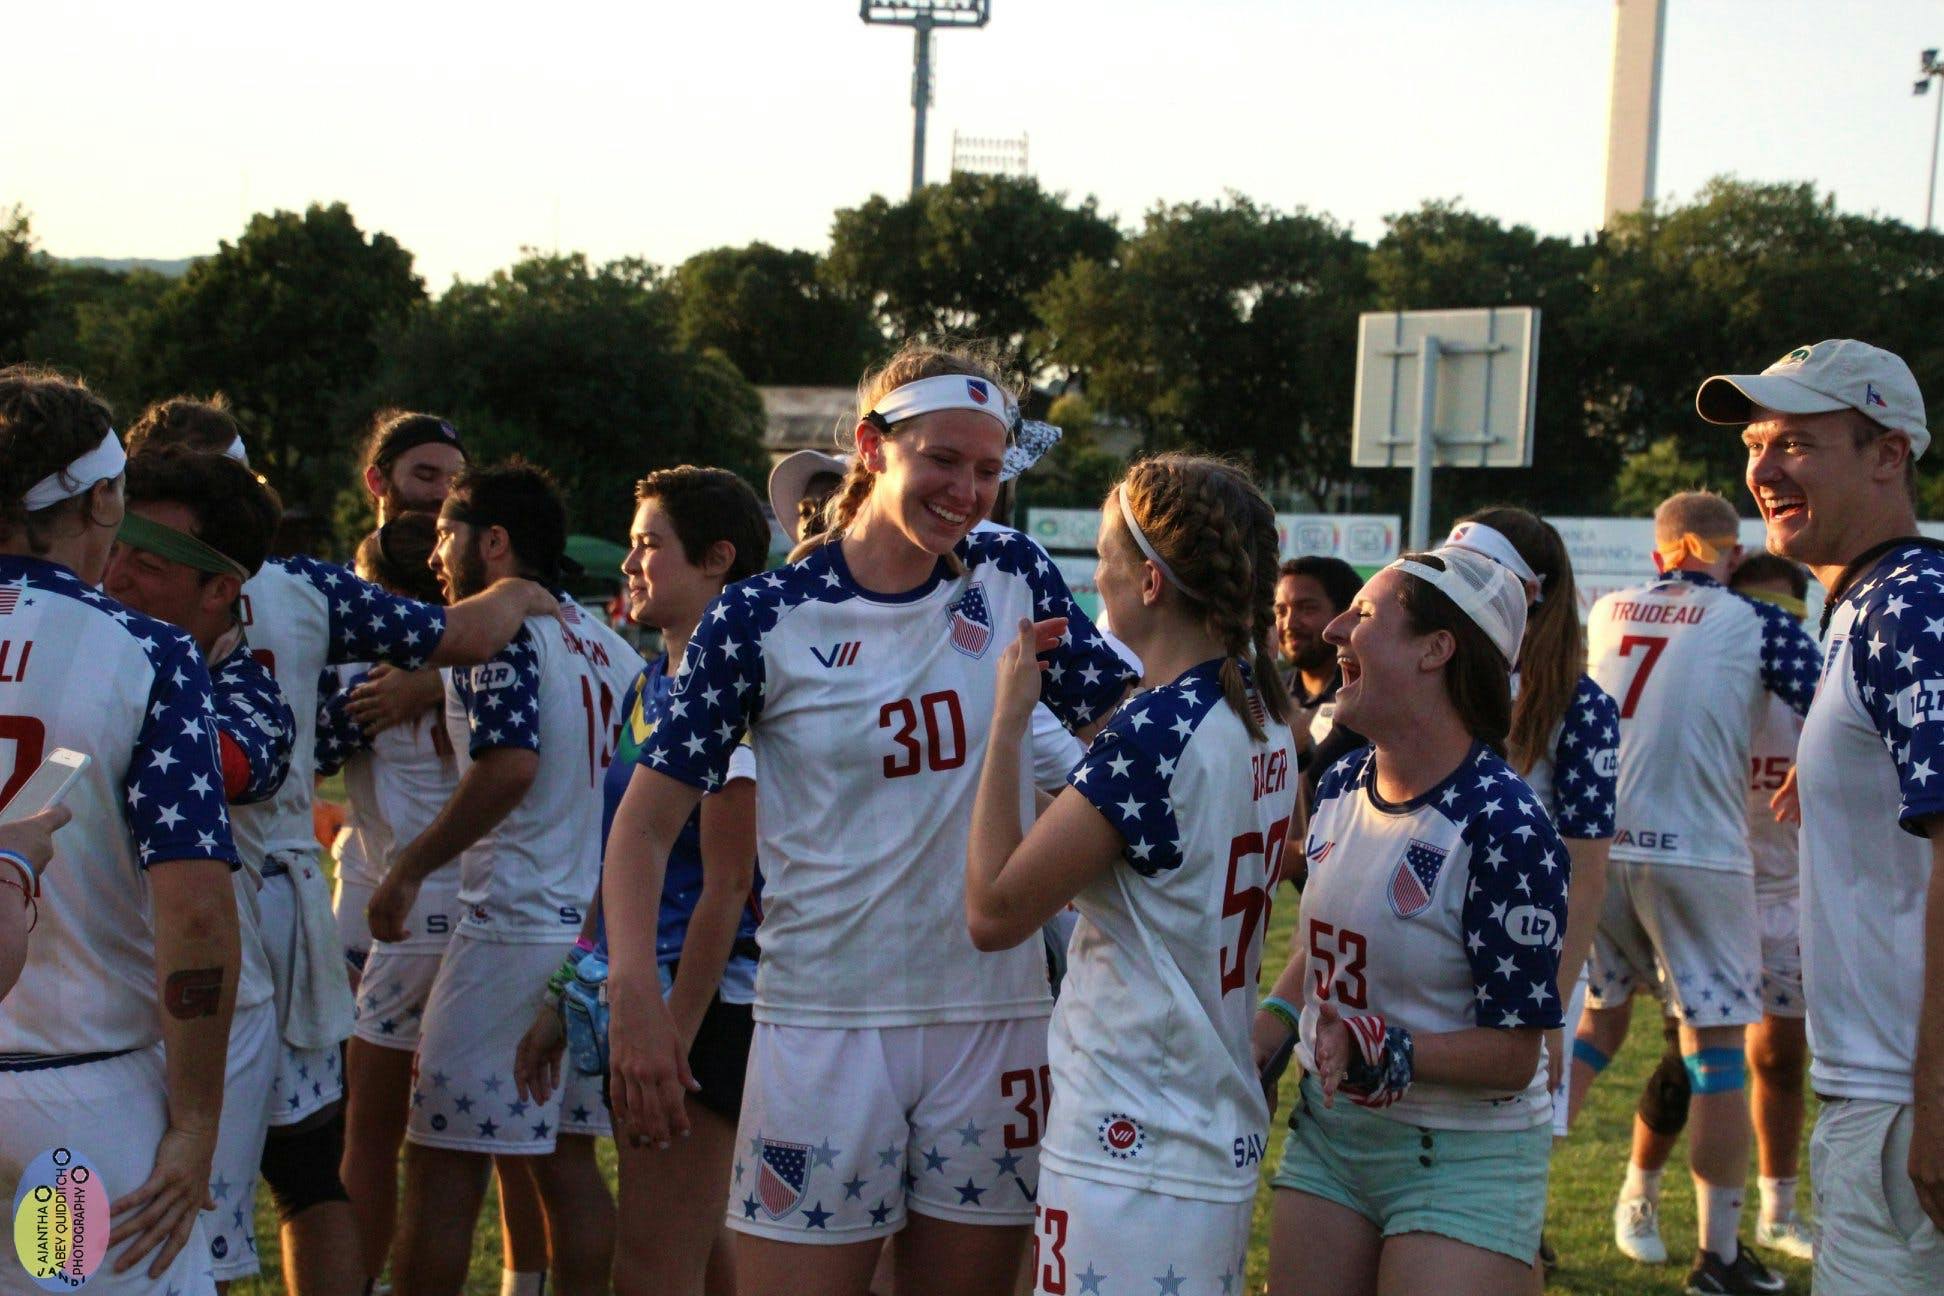 US National Team celebrates their win at the 2018 World Cup Final